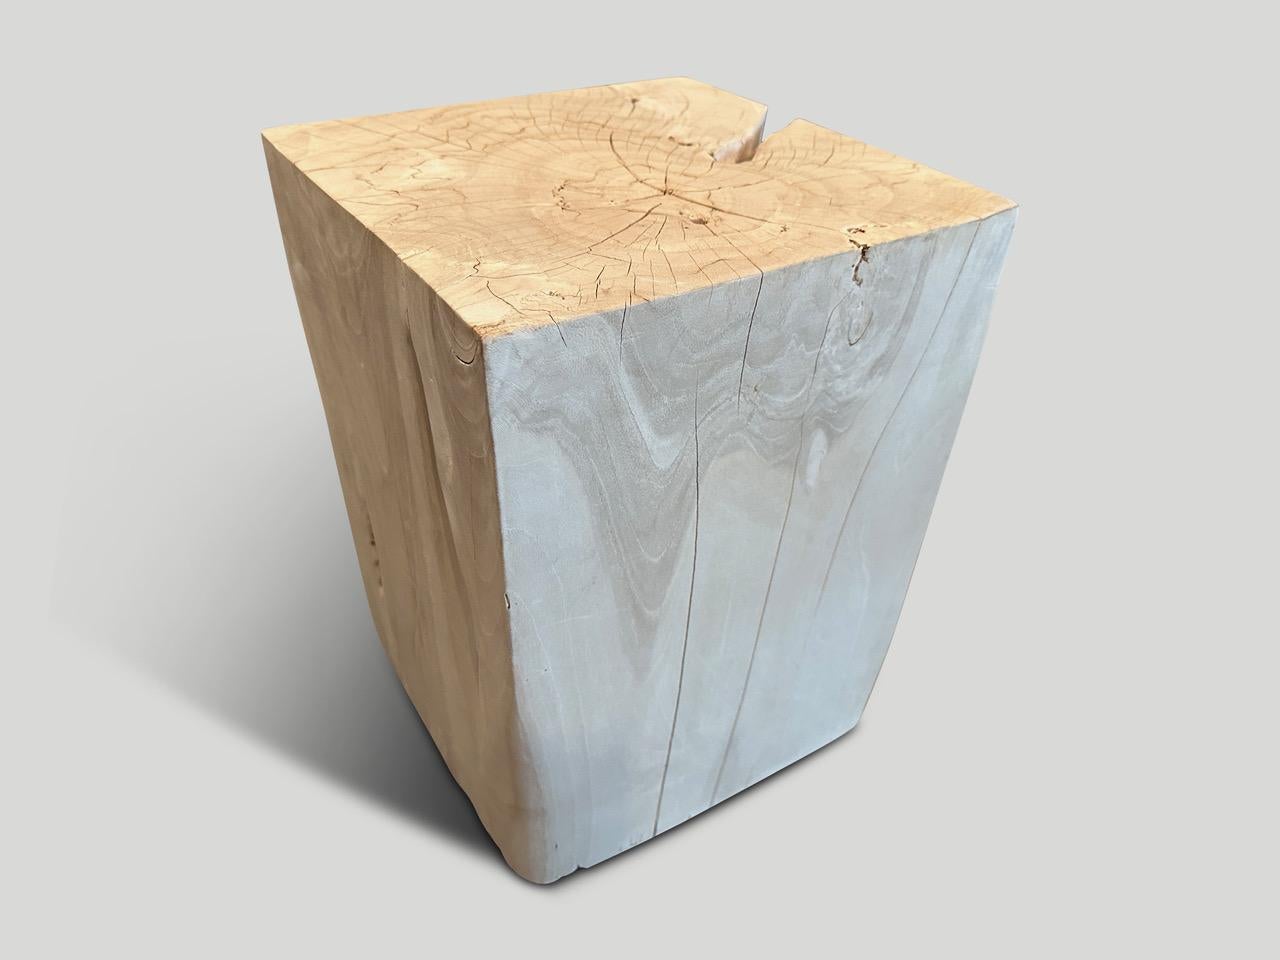 Beautiful reclaimed teak wood cylinder side table or stool. Bleached to a bone finish and carved into a minimalist cylinder whilst respecting the natural organic wood. Also available charred. We have a collection. The images reflect one.

The St.